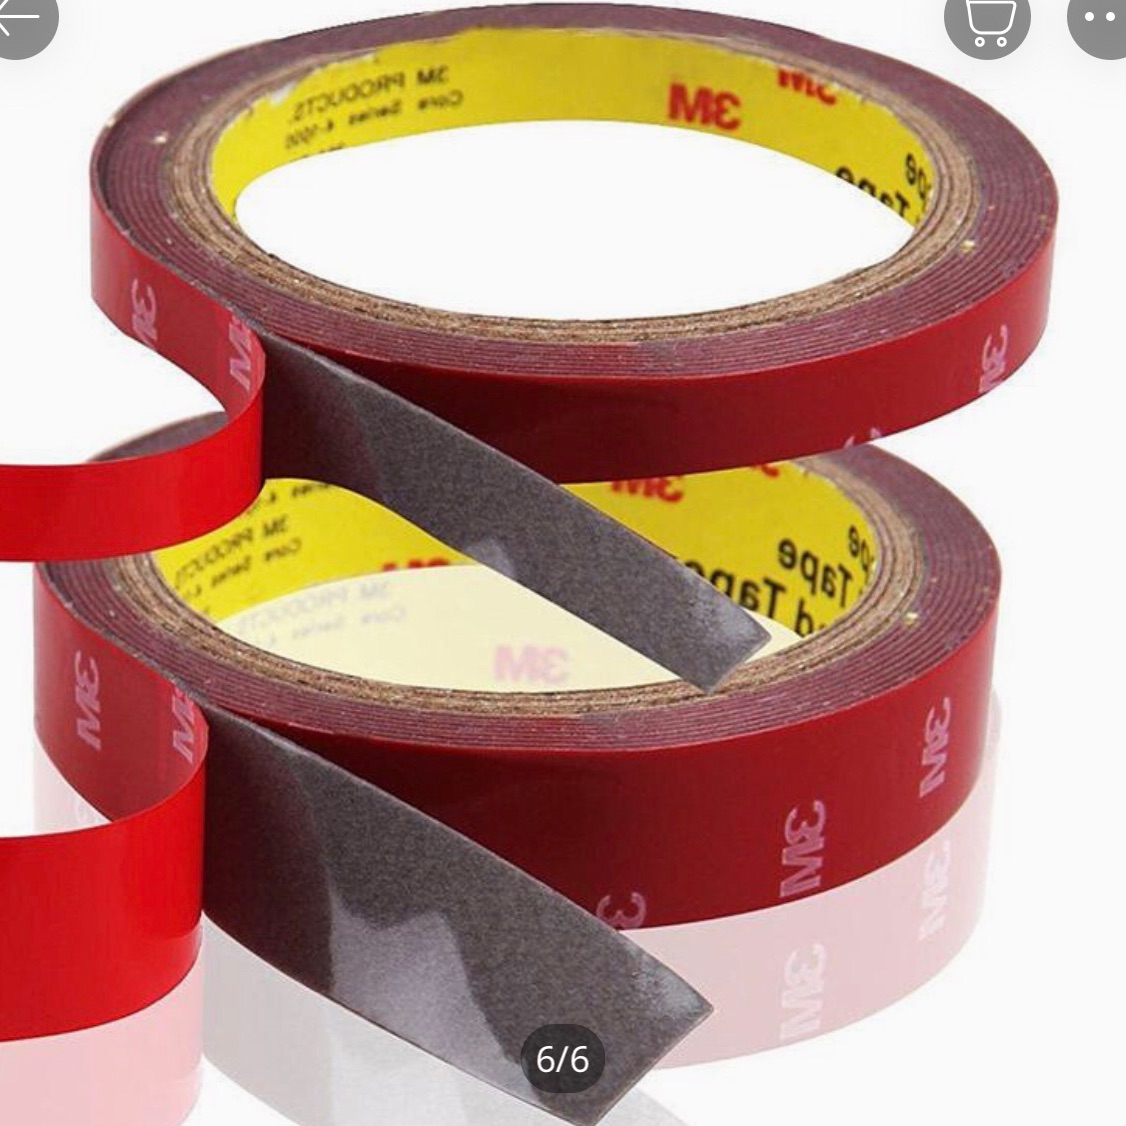 home depot tuscaloosa double sided 3m tape